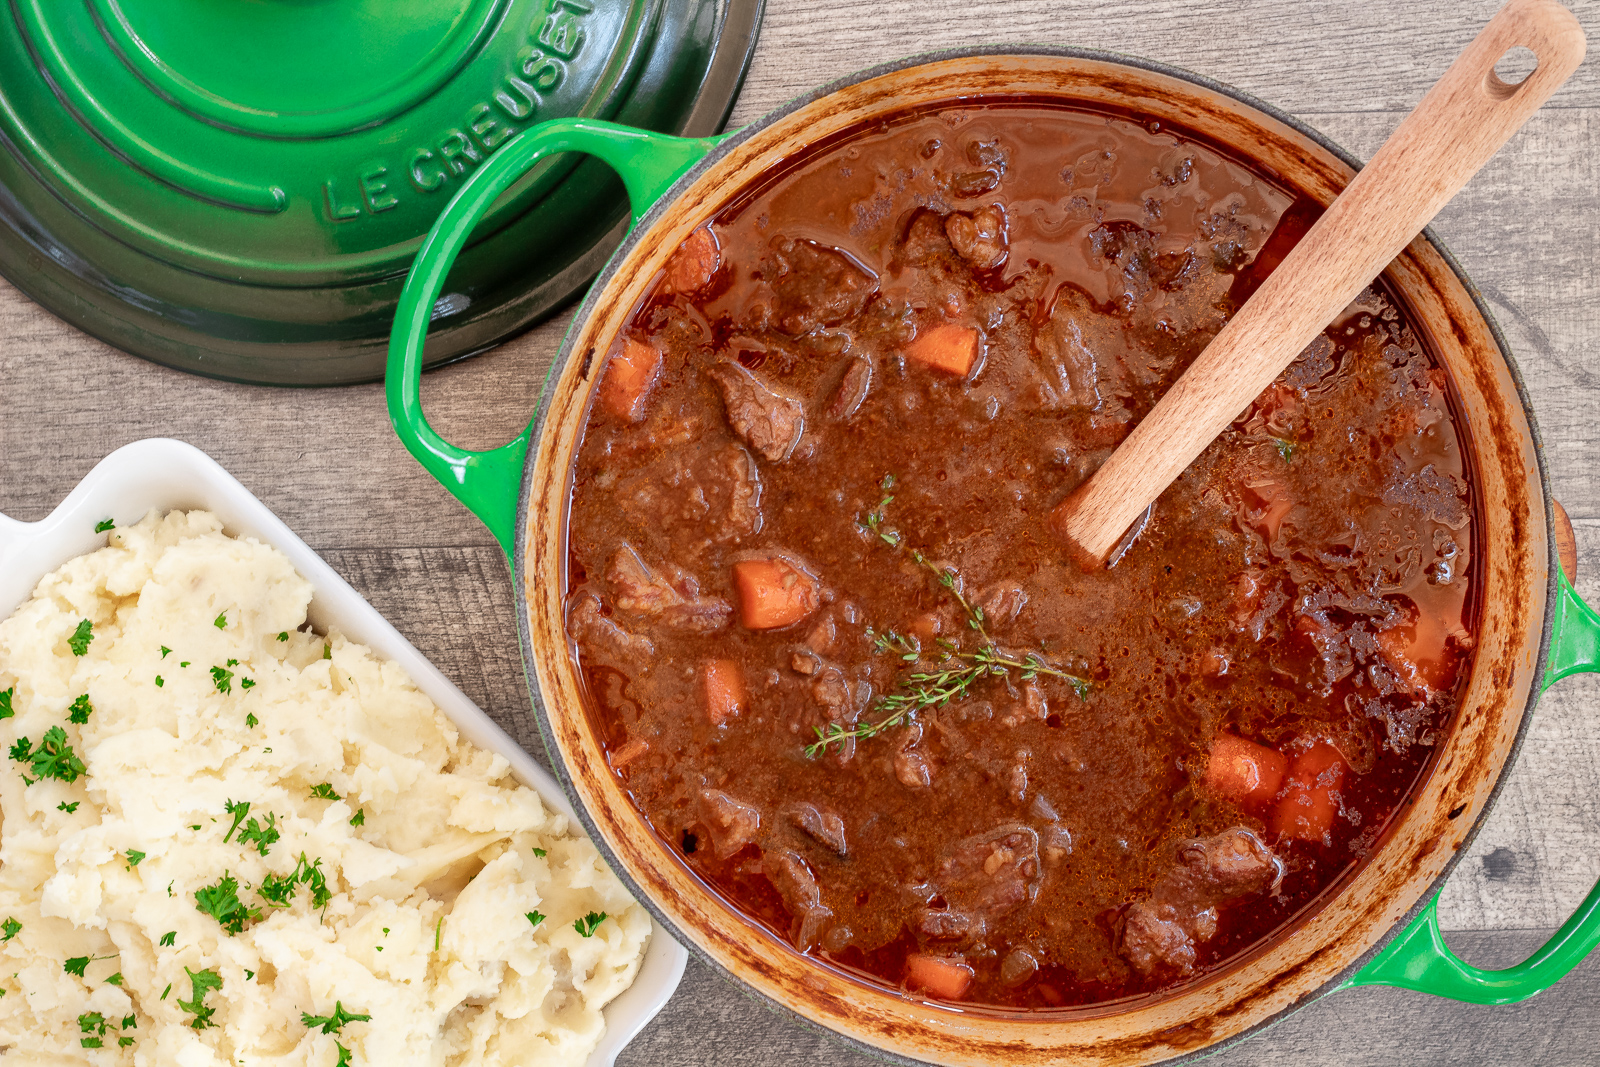 Guinness stew with mashed potatoes